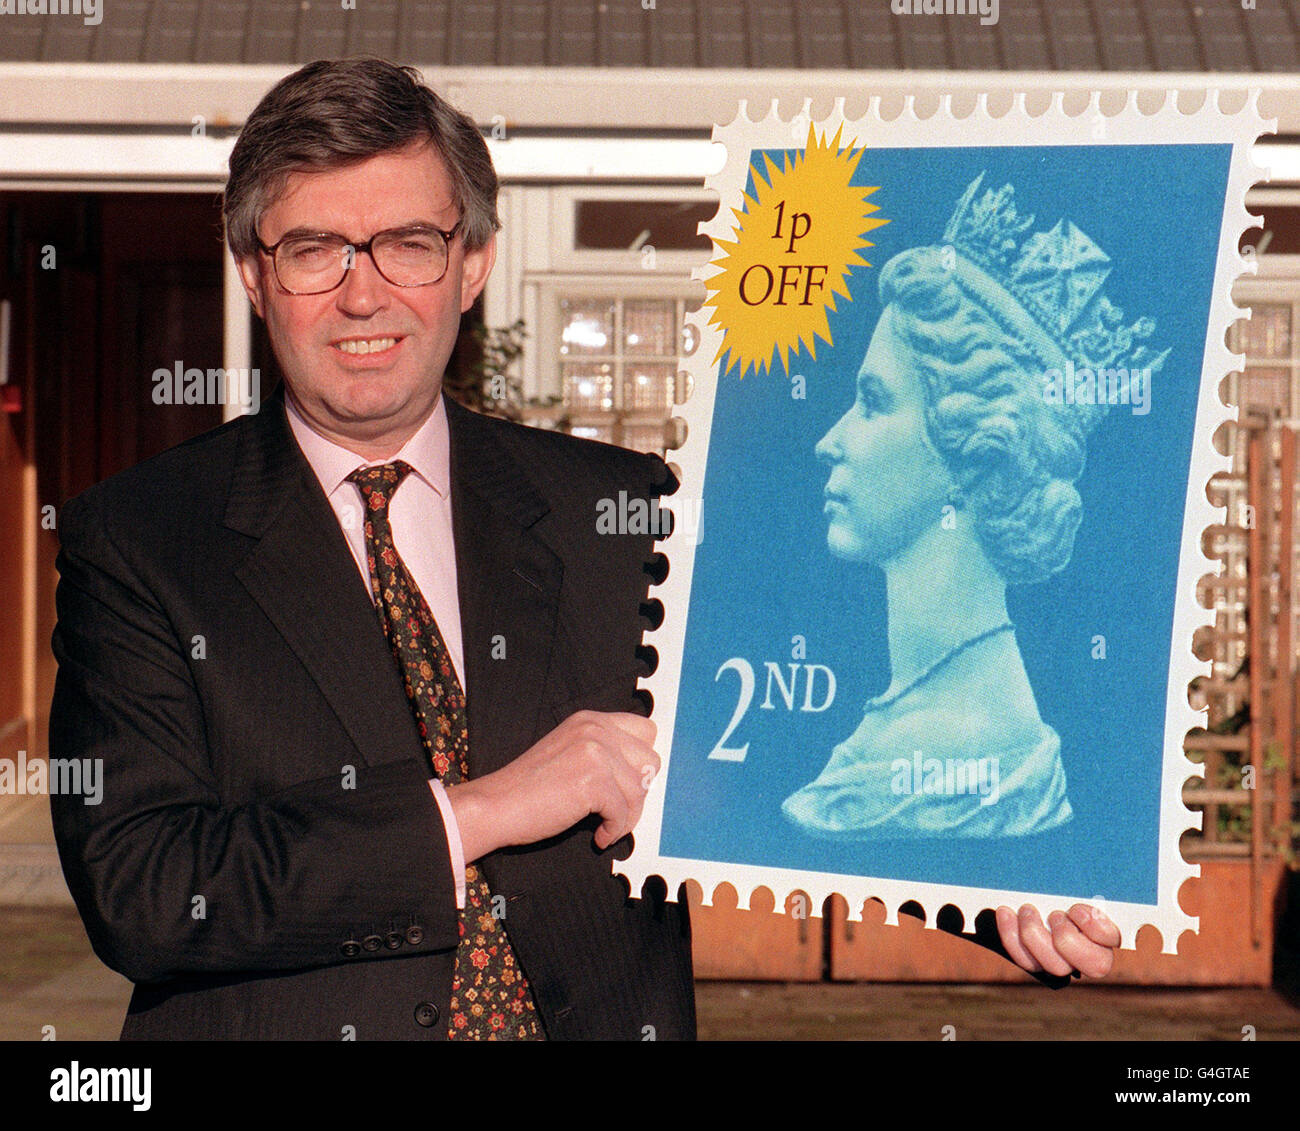 Royal Mail managing director, Richard Dykes, holds up a giant 2nd Class Stamp, at the Post Office Headquarters in London after Royal Mail cut the price of second class post by a penny to 19p and vowed to continue the price freeze on the basic first class rate of 26p. Stock Photo